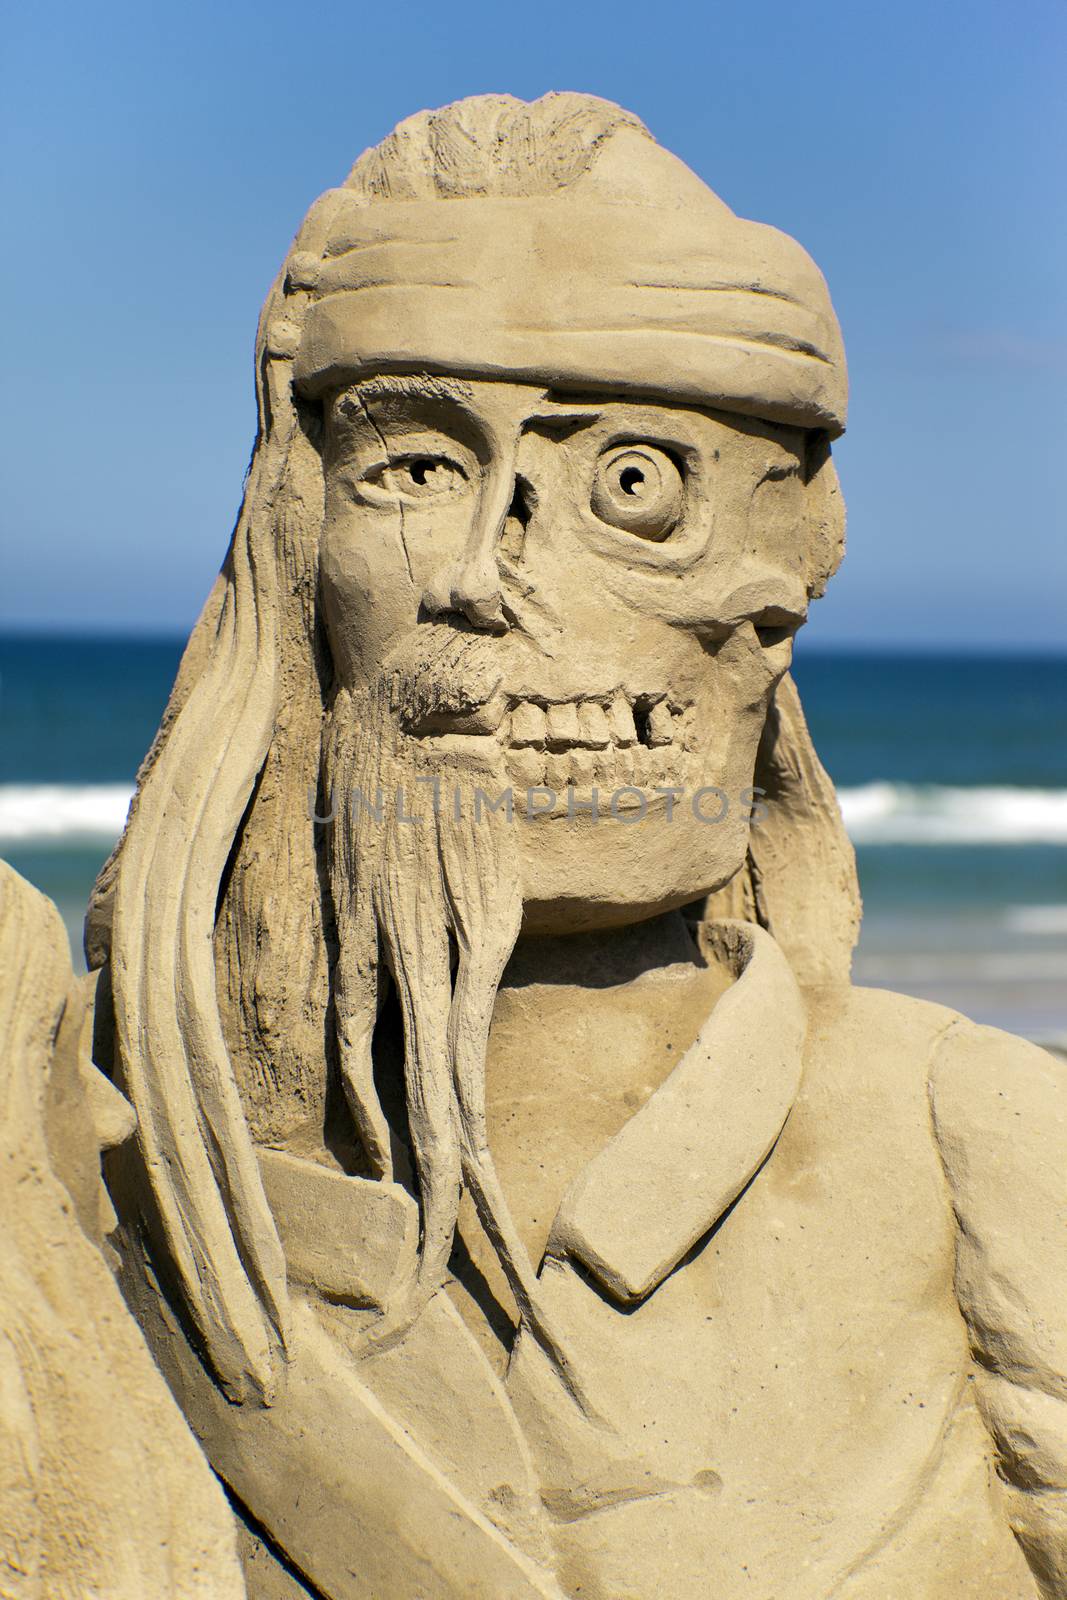 SURFERS PARADISE QLD - FEBRUARY, 11: Mr. Peter Redmond participates in "Pirates in Paradise" Sand Sculptor Championship on February 11, 2012 in Surfers Paradise QLD